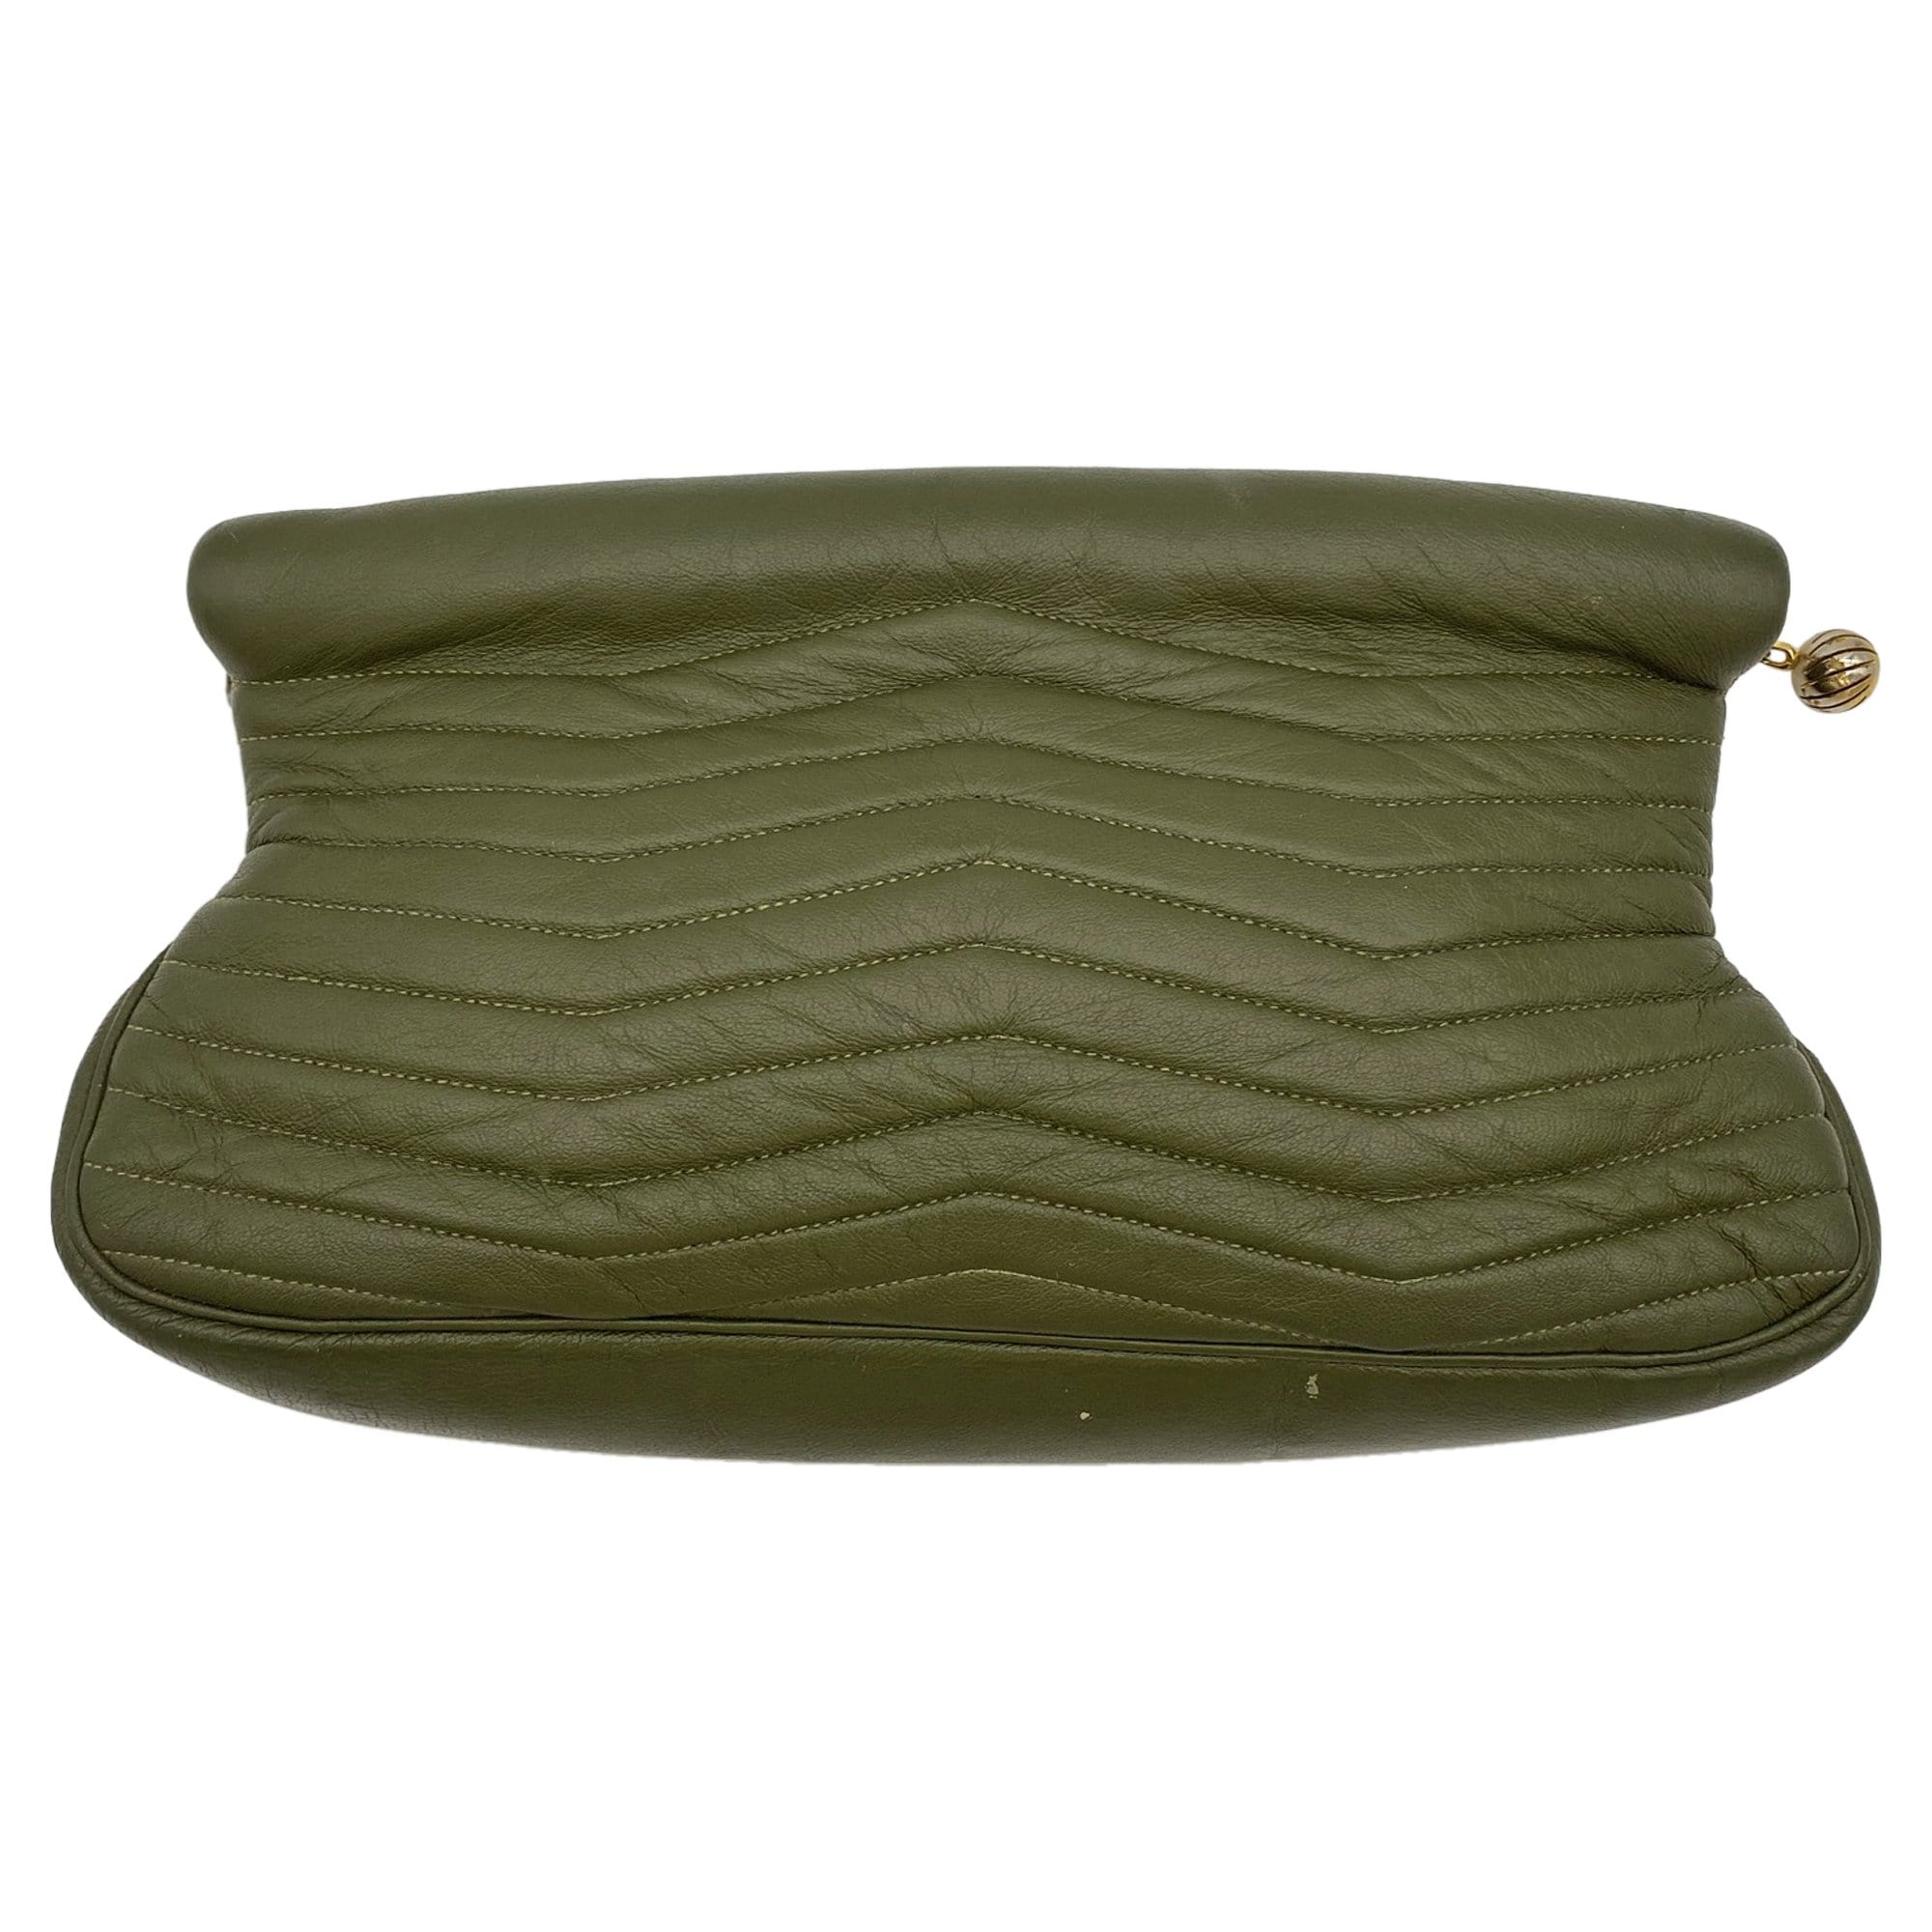 Ruodan Shoprazy Trendy Handheld Party, Casual, Formal Purse/Wallet/Clutch  for Girls and Women (Dark Olive Green) : Amazon.in: Fashion